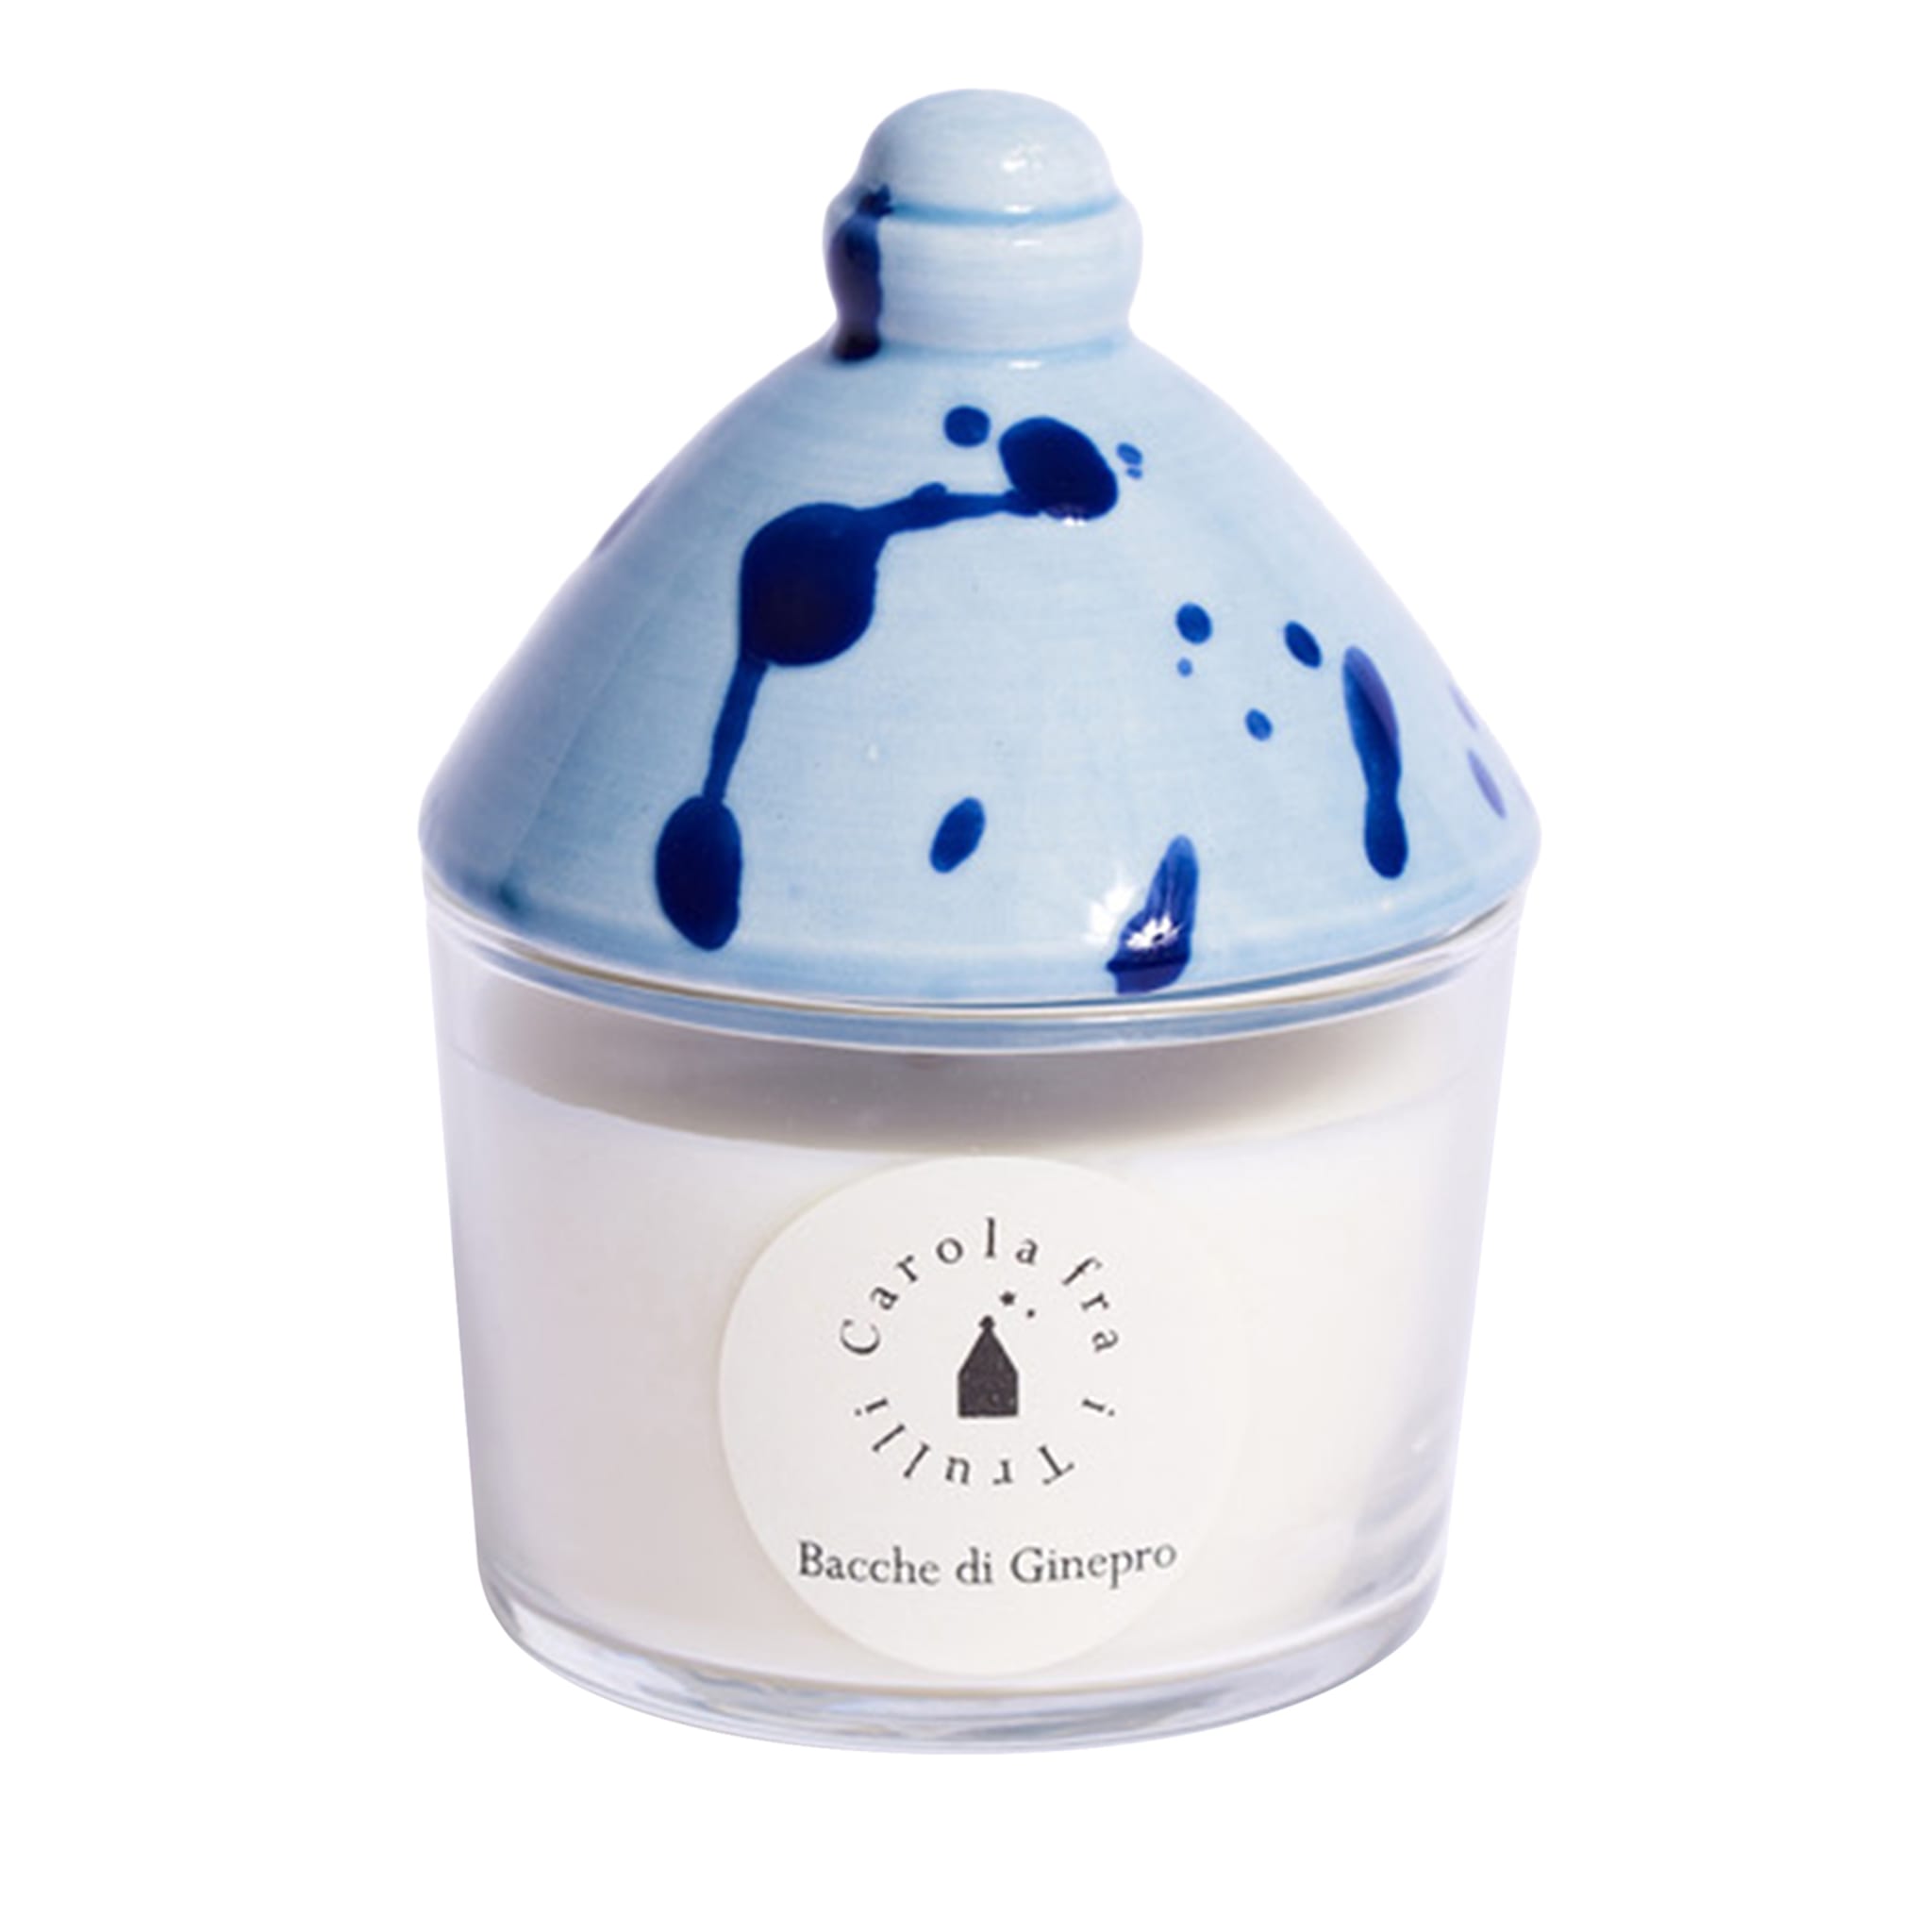 Bacche di Ginepro Scented Candle with Ceramic Lid - Main view